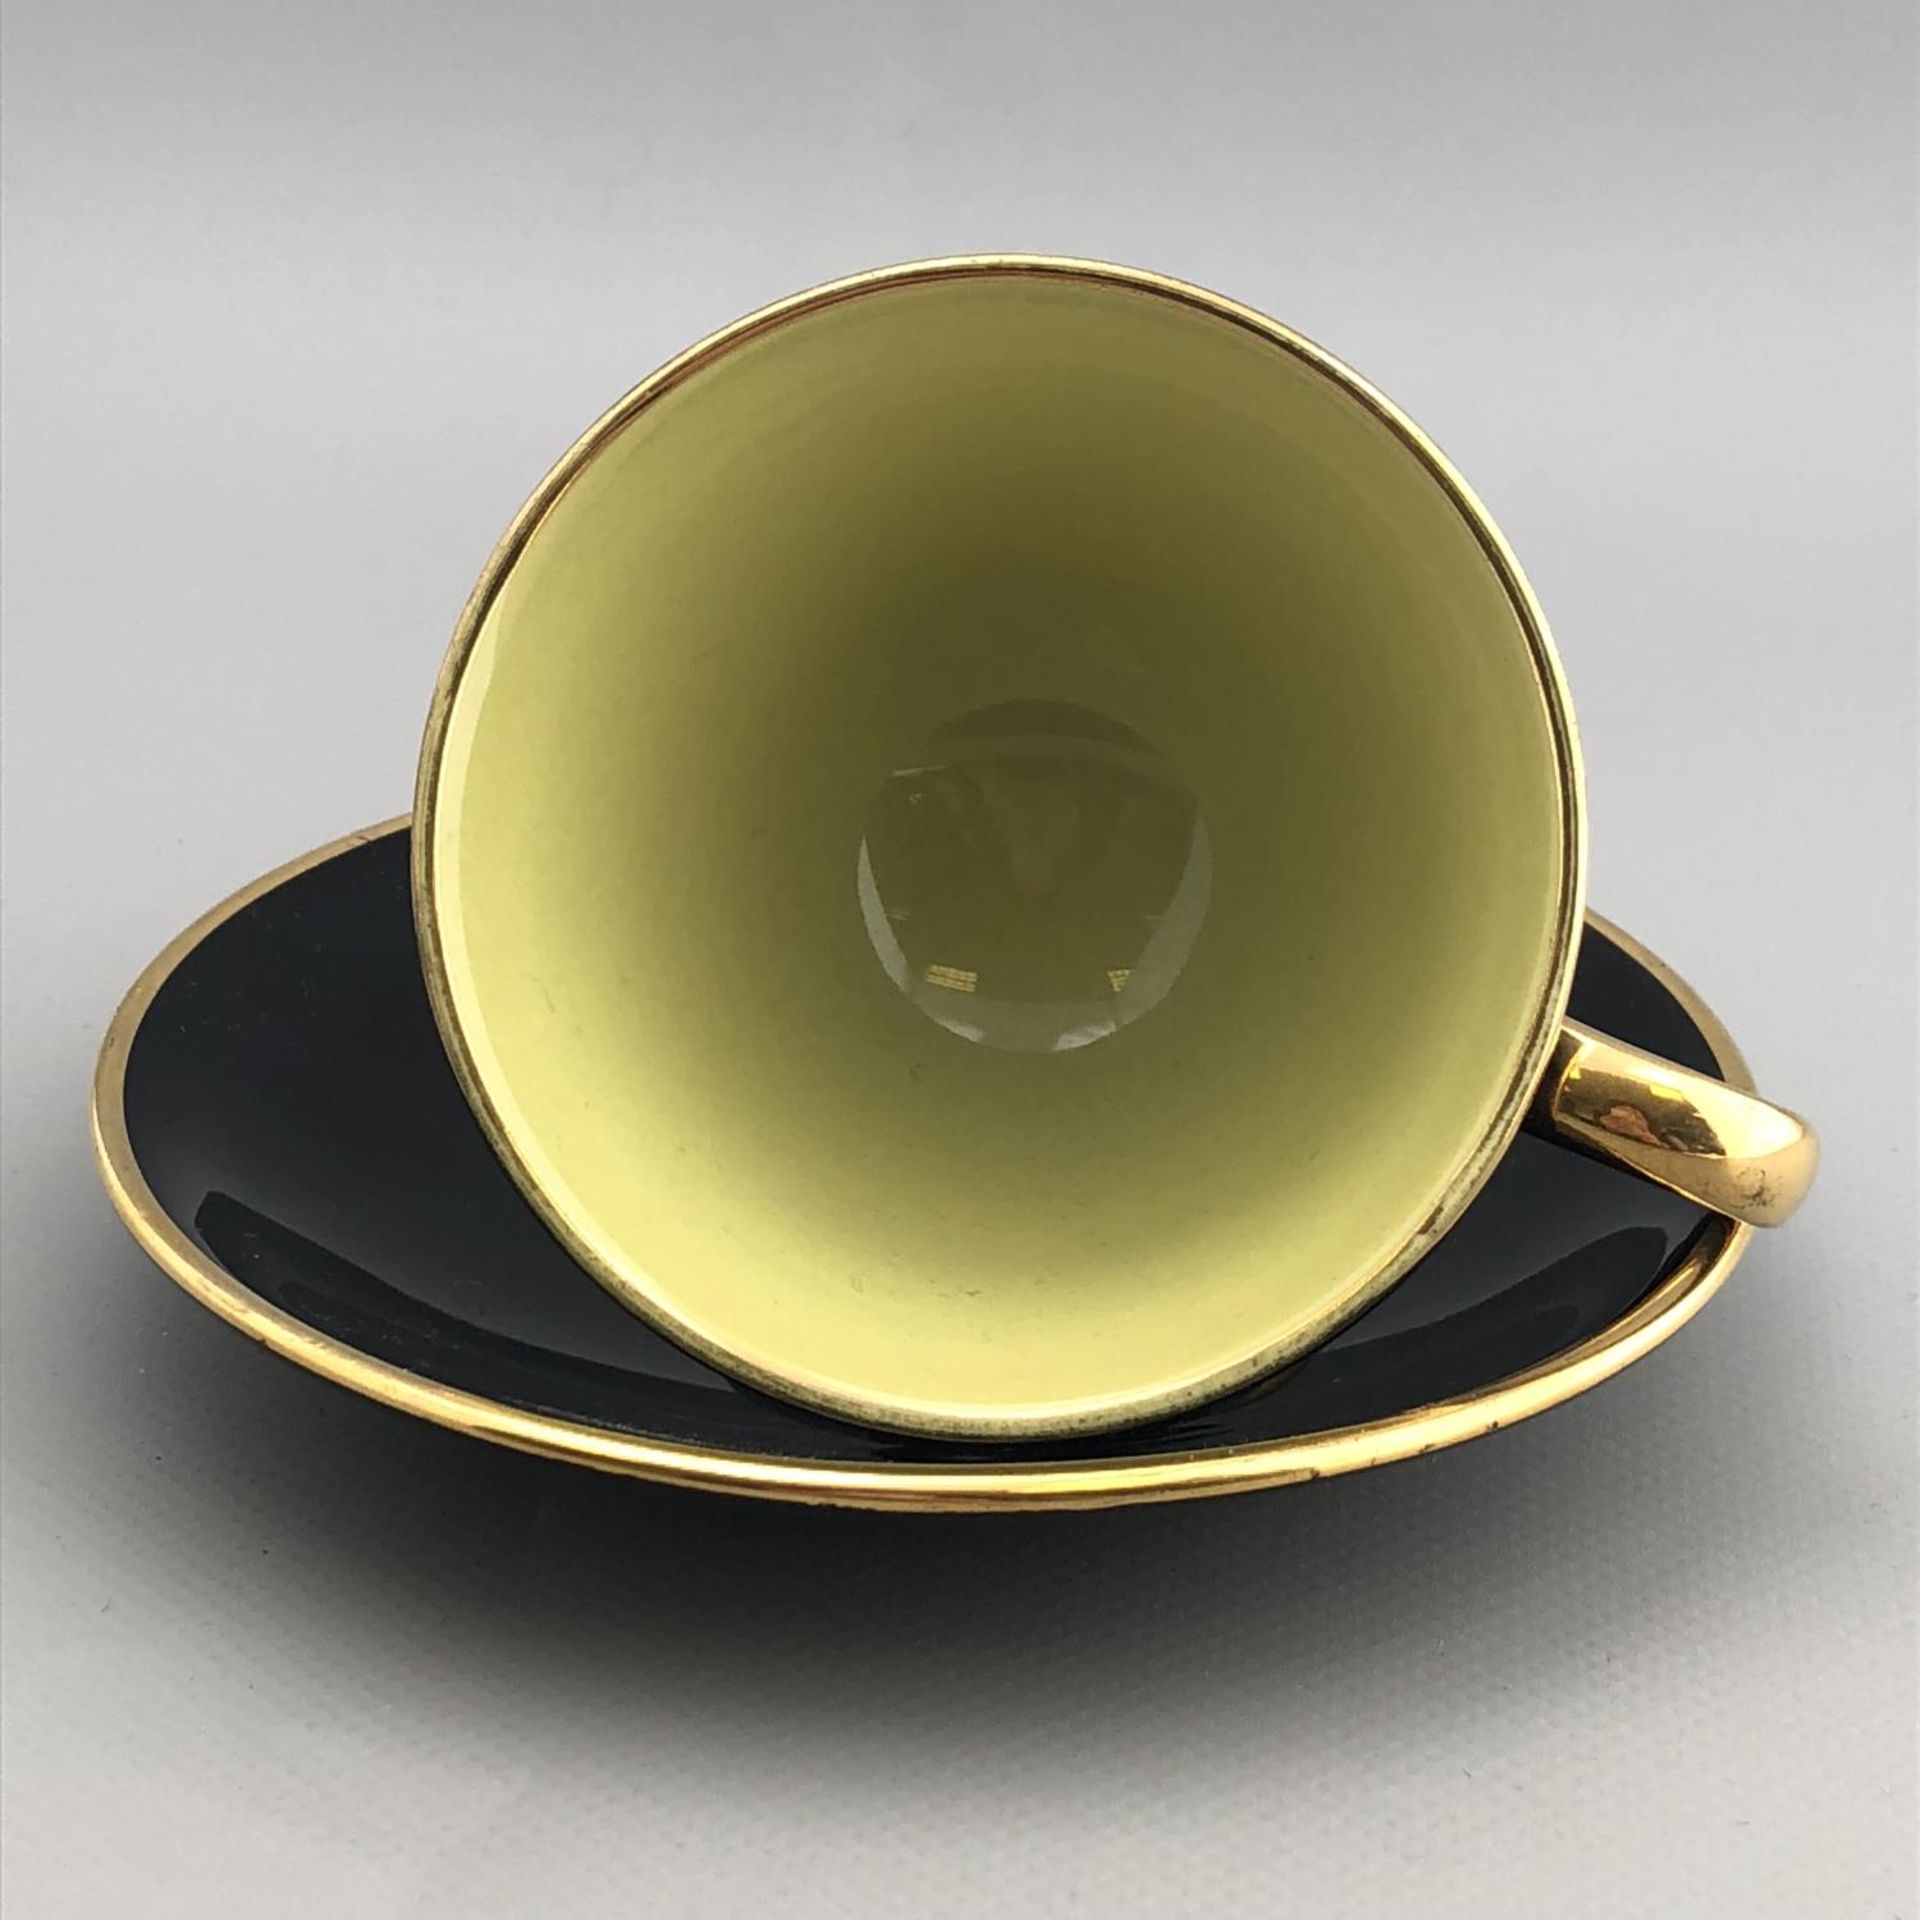 Black & Gilt Porcelain Coffee Cup with Lime Green Interior - Stavangerflint - Norway - Image 2 of 3